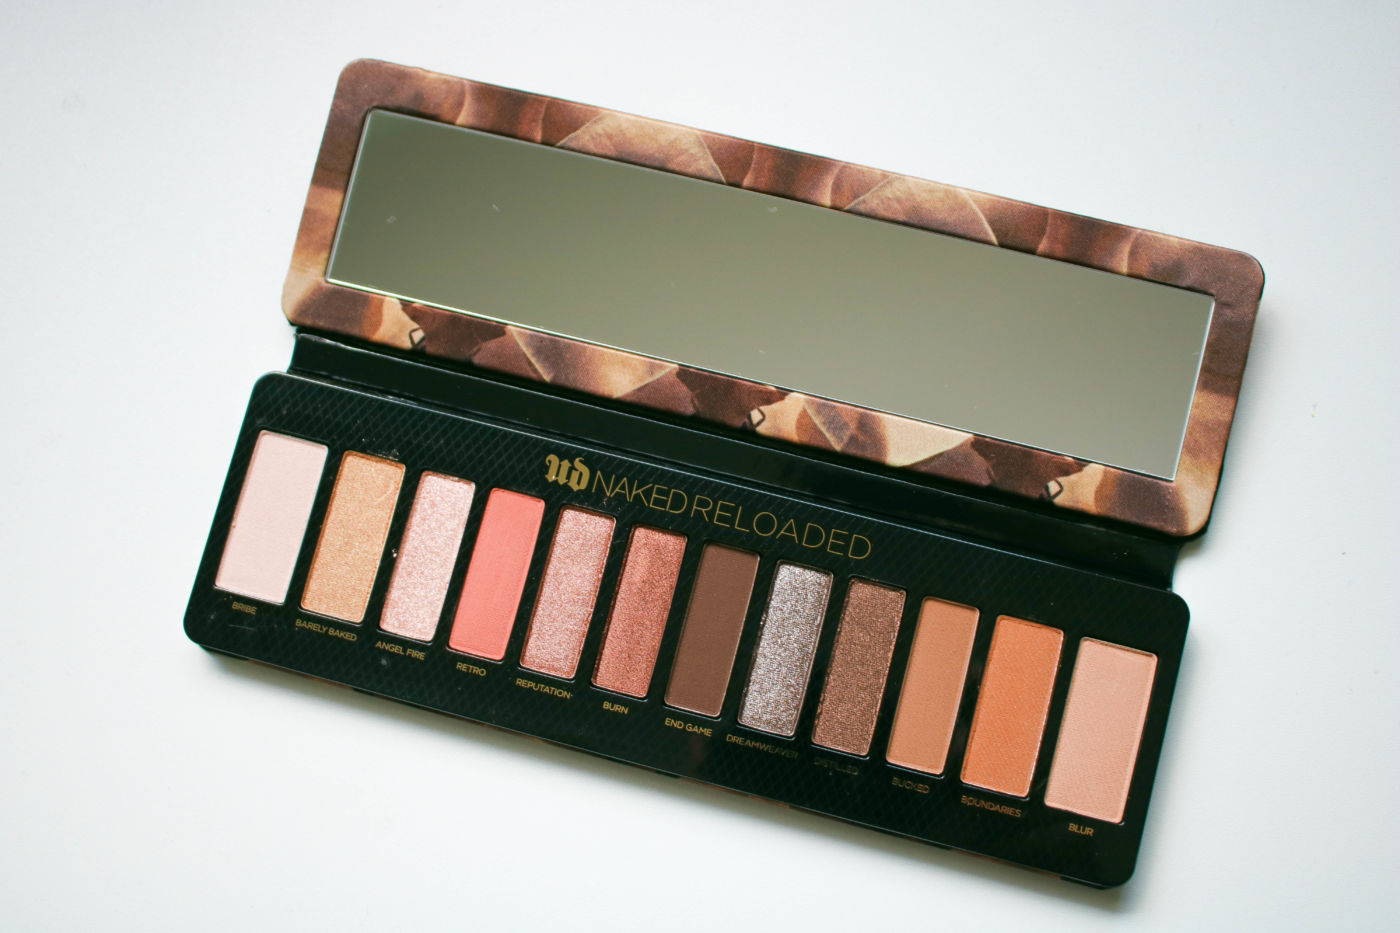 urban decay naked reloaded, urban decay naked reloaded swatches, new naked palette, naked dupe, new eyeshadow palette 2019, urban decay eyeshadow, new naked palette, neutral eyeshadow palette, new beauty launches 2019